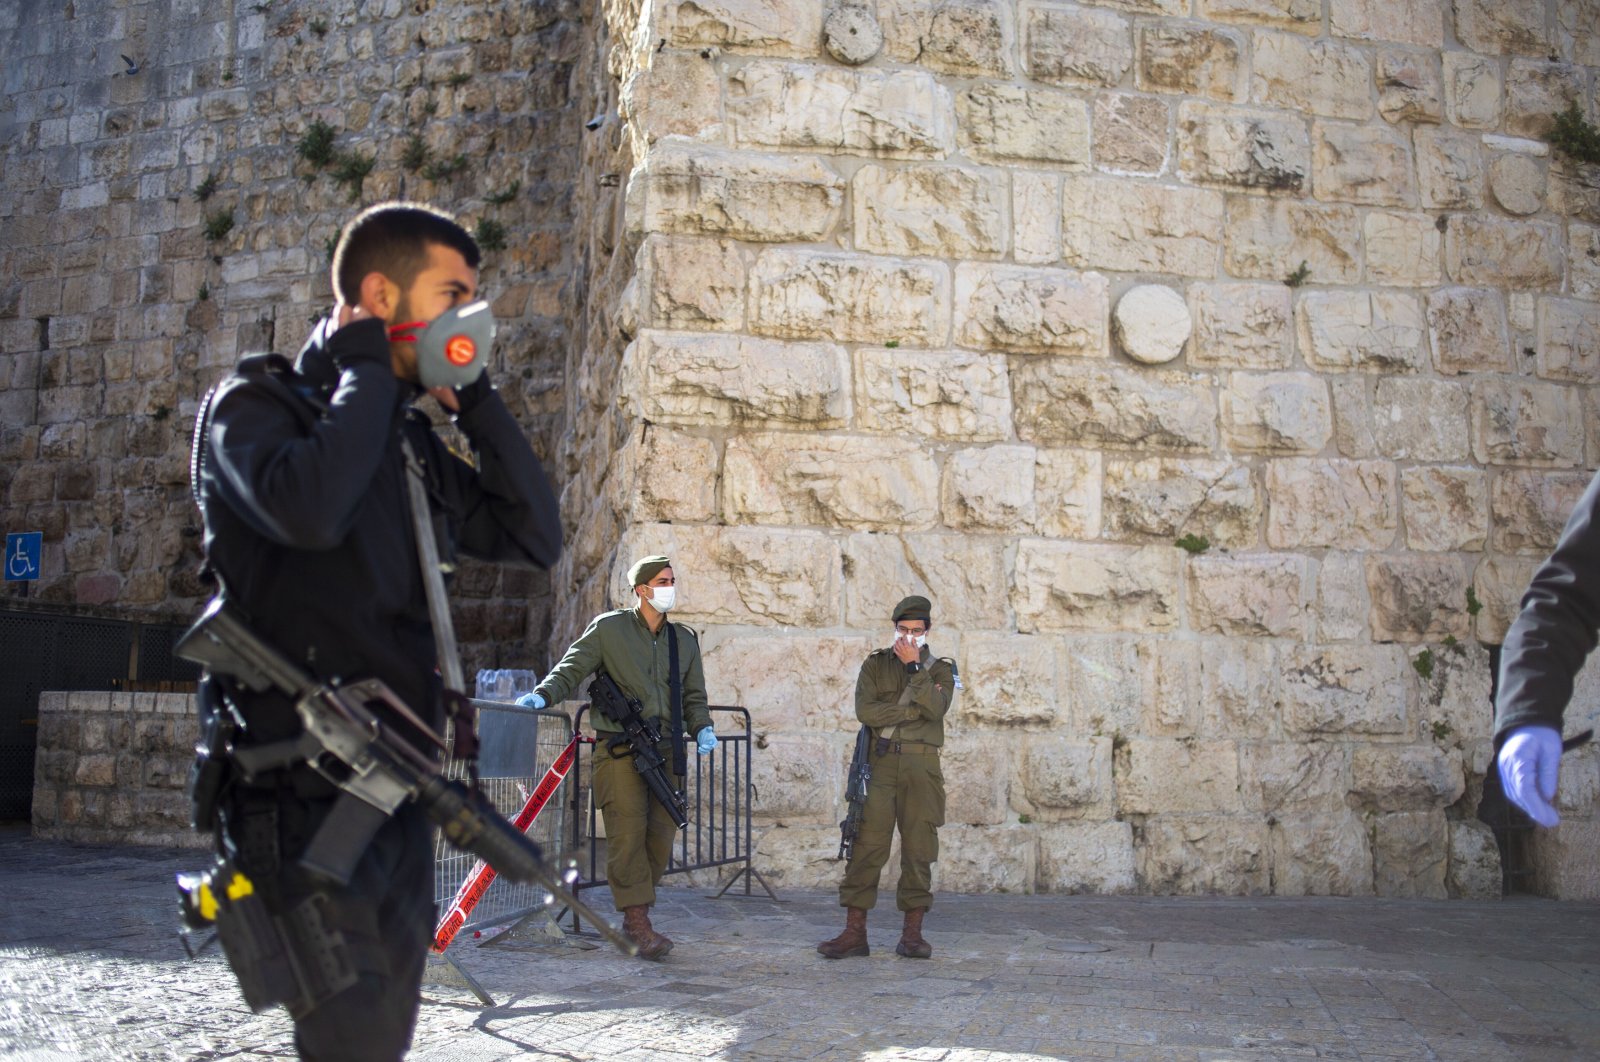 An Israeli police officer and Israeli soldiers block Jaffa gate during a lockdown following government measures in Jerusalem's old city, April 9, 2020. (AP Photo)